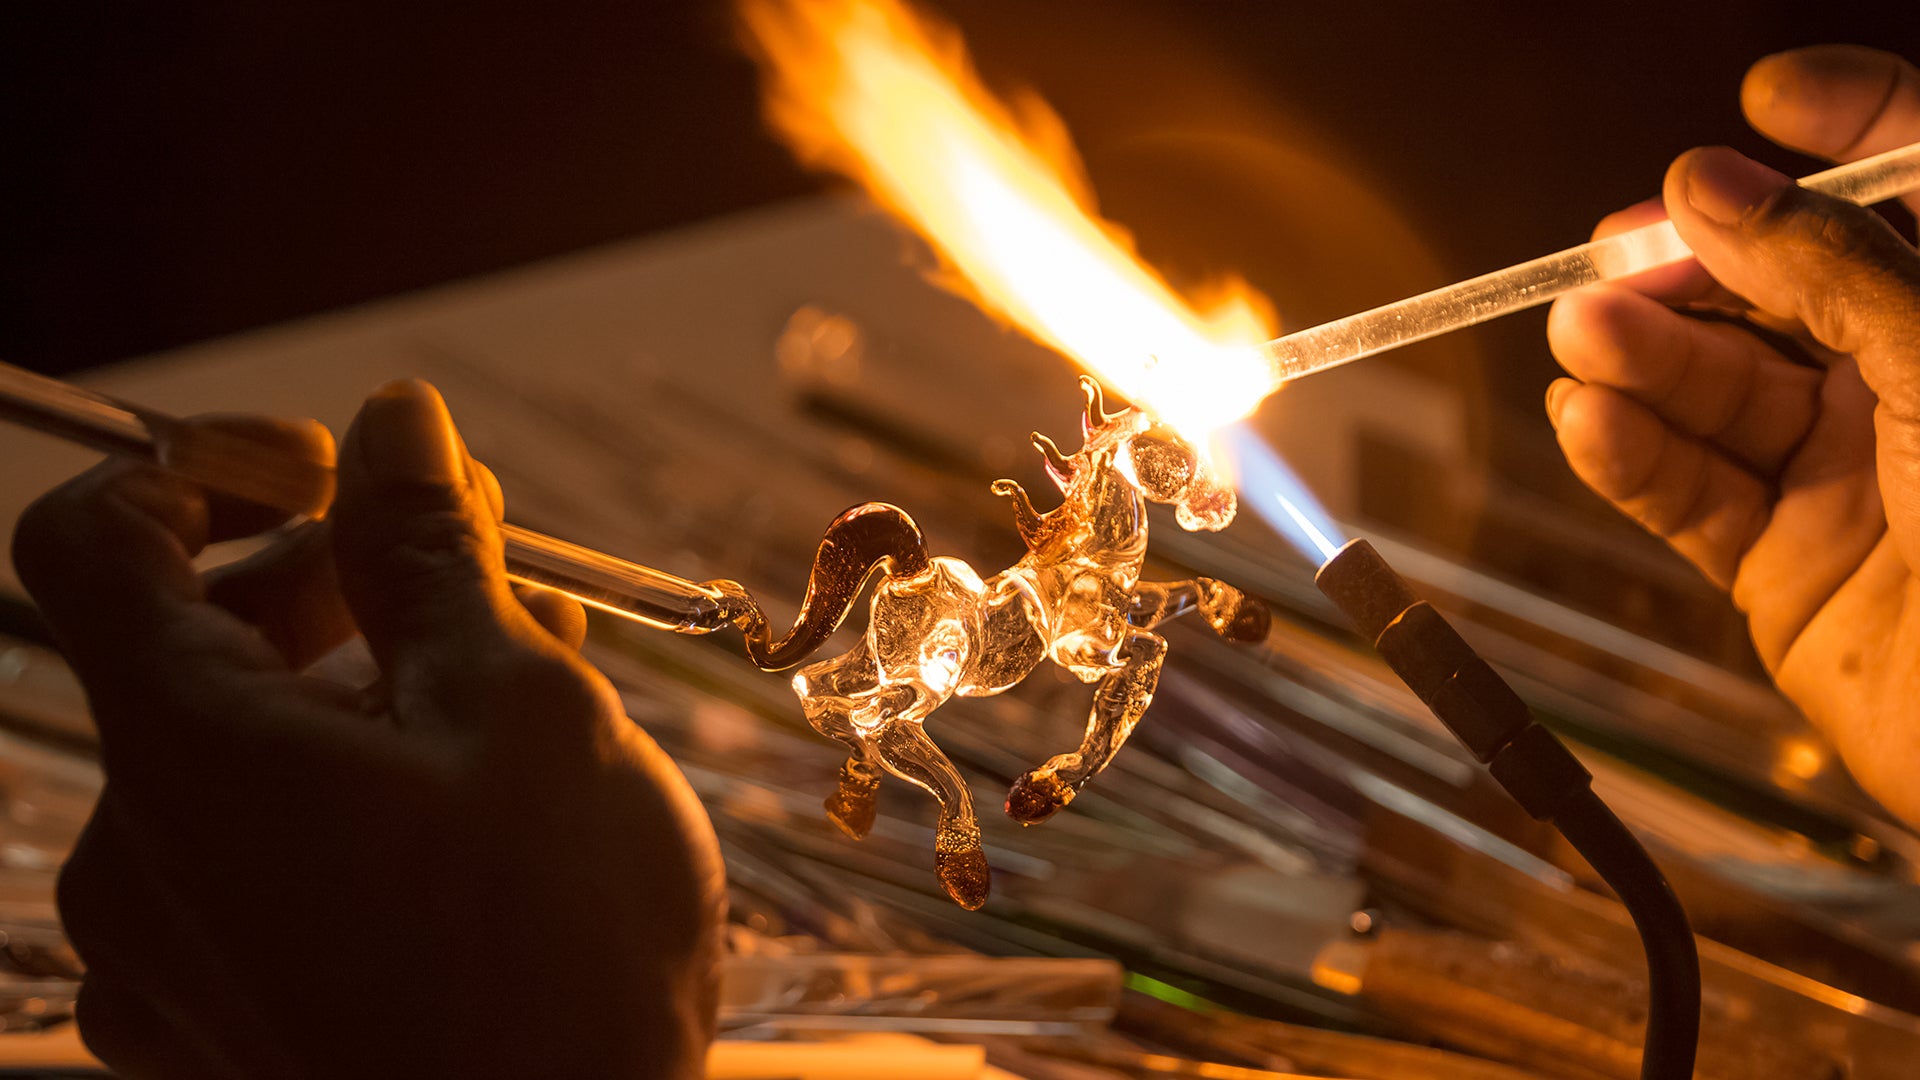 Closeup shot of a glass horse figurine being created using a blowtorch as a lampworking technique.